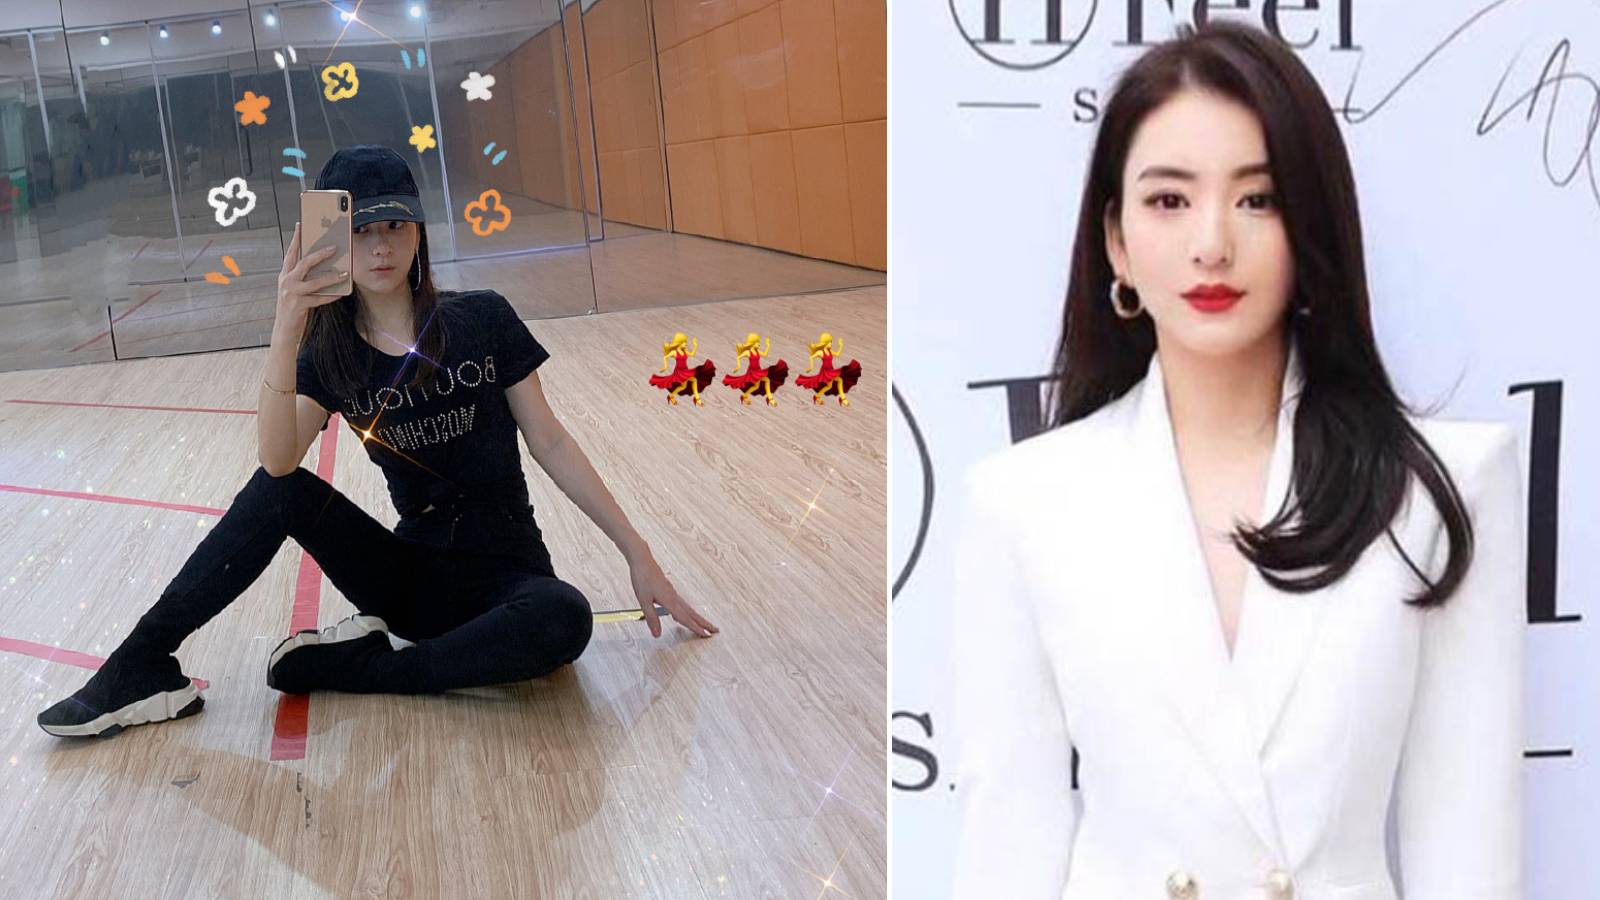 Moka Fang Criticised For “Stiff Dance Moves” After Posting Dance Cover of Blackpink's 'How You Like That'